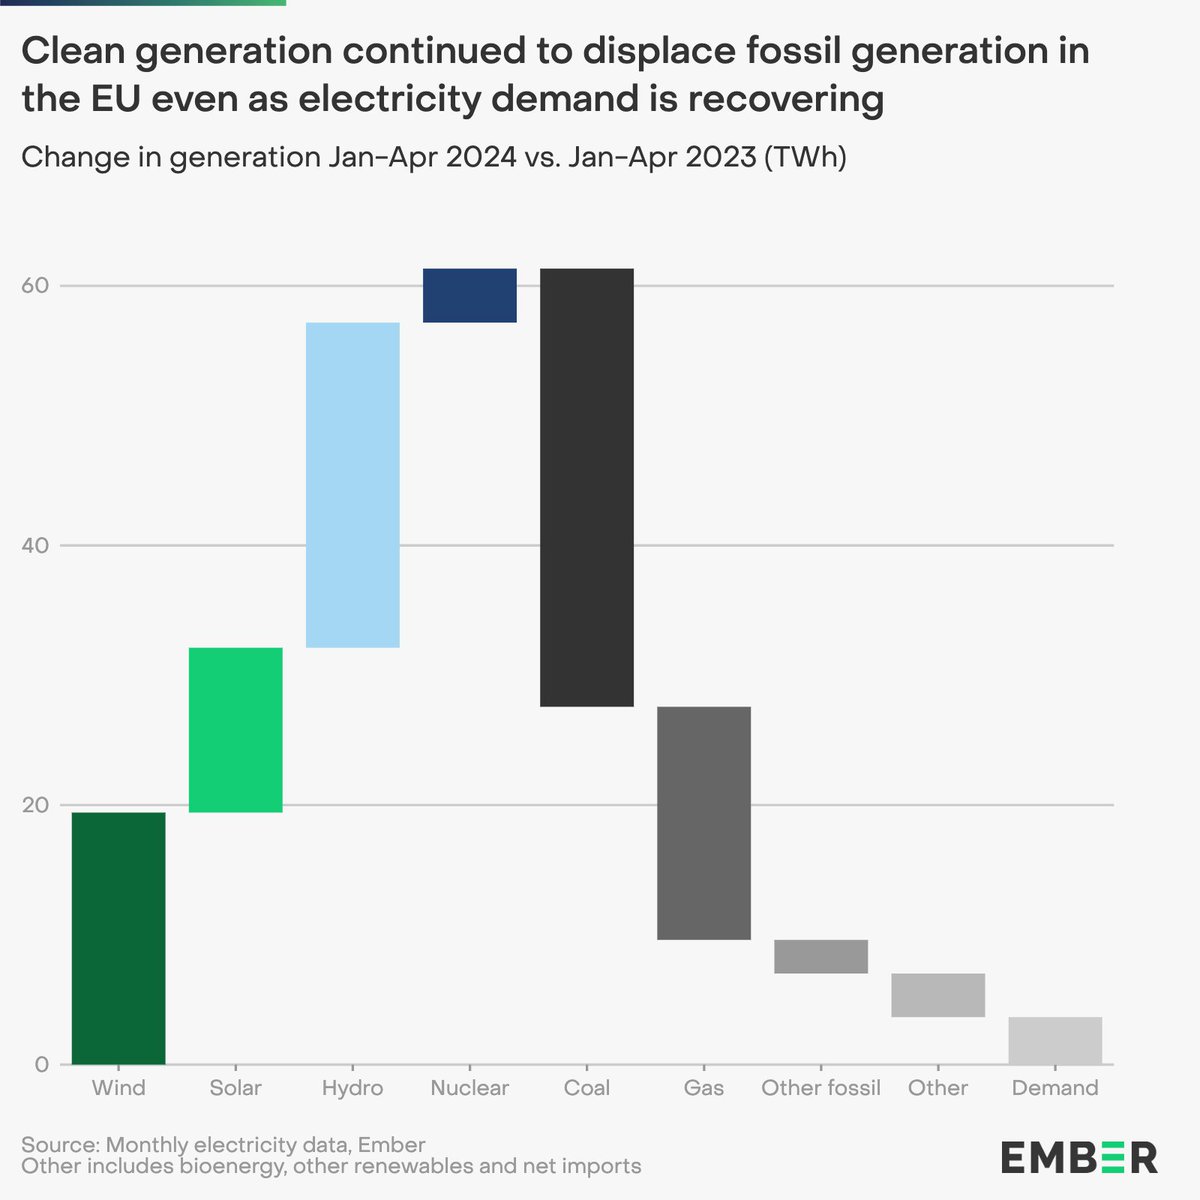 Despite a recovery in electricity demand in 🇪🇺, fossil generation ↘️ by 18% year-on-year for the first four months of 2024. Meanwhile, wind and solar generation ↗️ by 14% compared to the same period last year. ember-climate.org/insights/in-br…